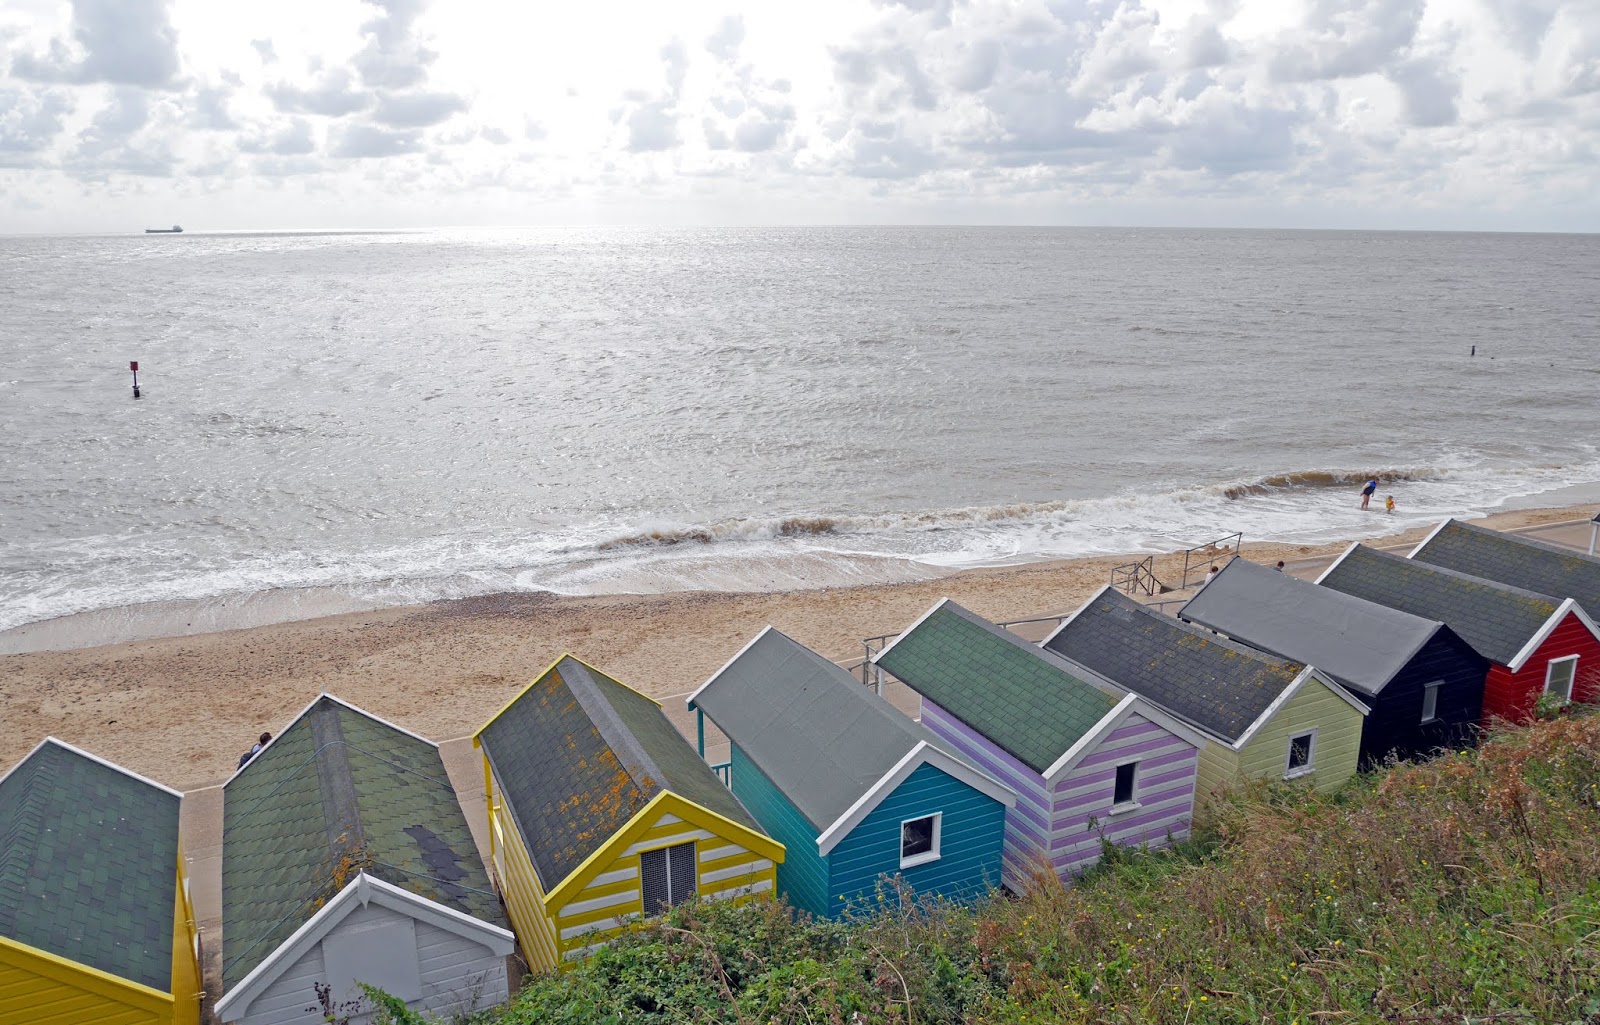 Colourful beach huts on Southwold beach